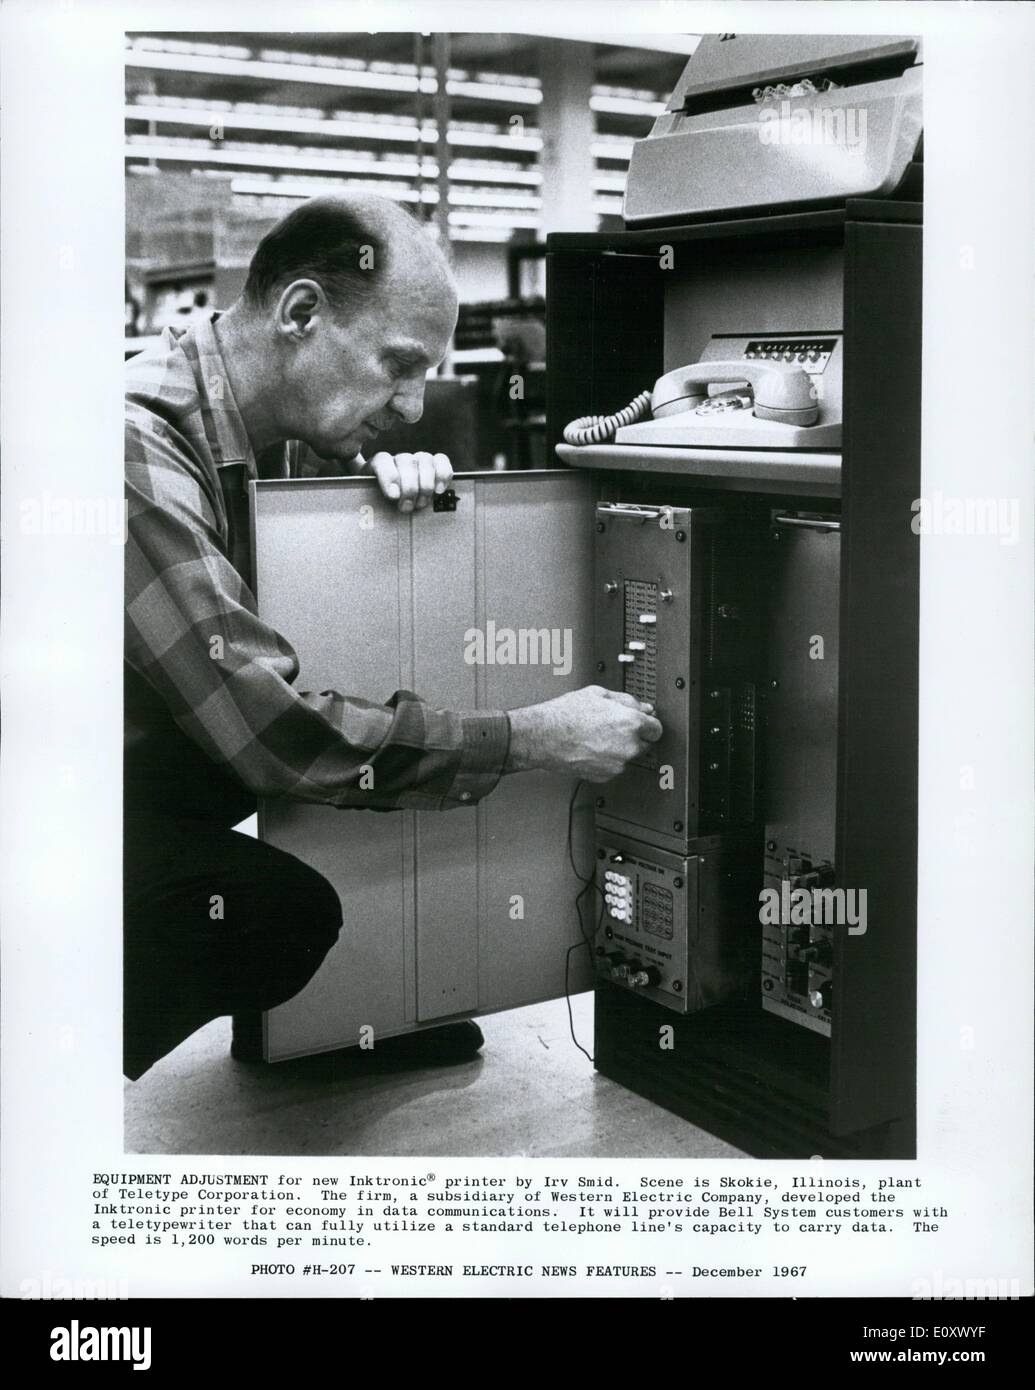 Dec. 12, 1967 - Equipment adjustment for new Inktronic printer by Irv Smid. Scene is Skokie, Illinois, plant of Teletype Corporation. The firm, a subsidiary of Western Electric Company, developed the Inktronik printer for economy data communications. It will provide Cell System customers with a typewriter that can fully utilize a standard telephone line's cpacity to carry data. The speed is 1,200 word per minute. Stock Photo